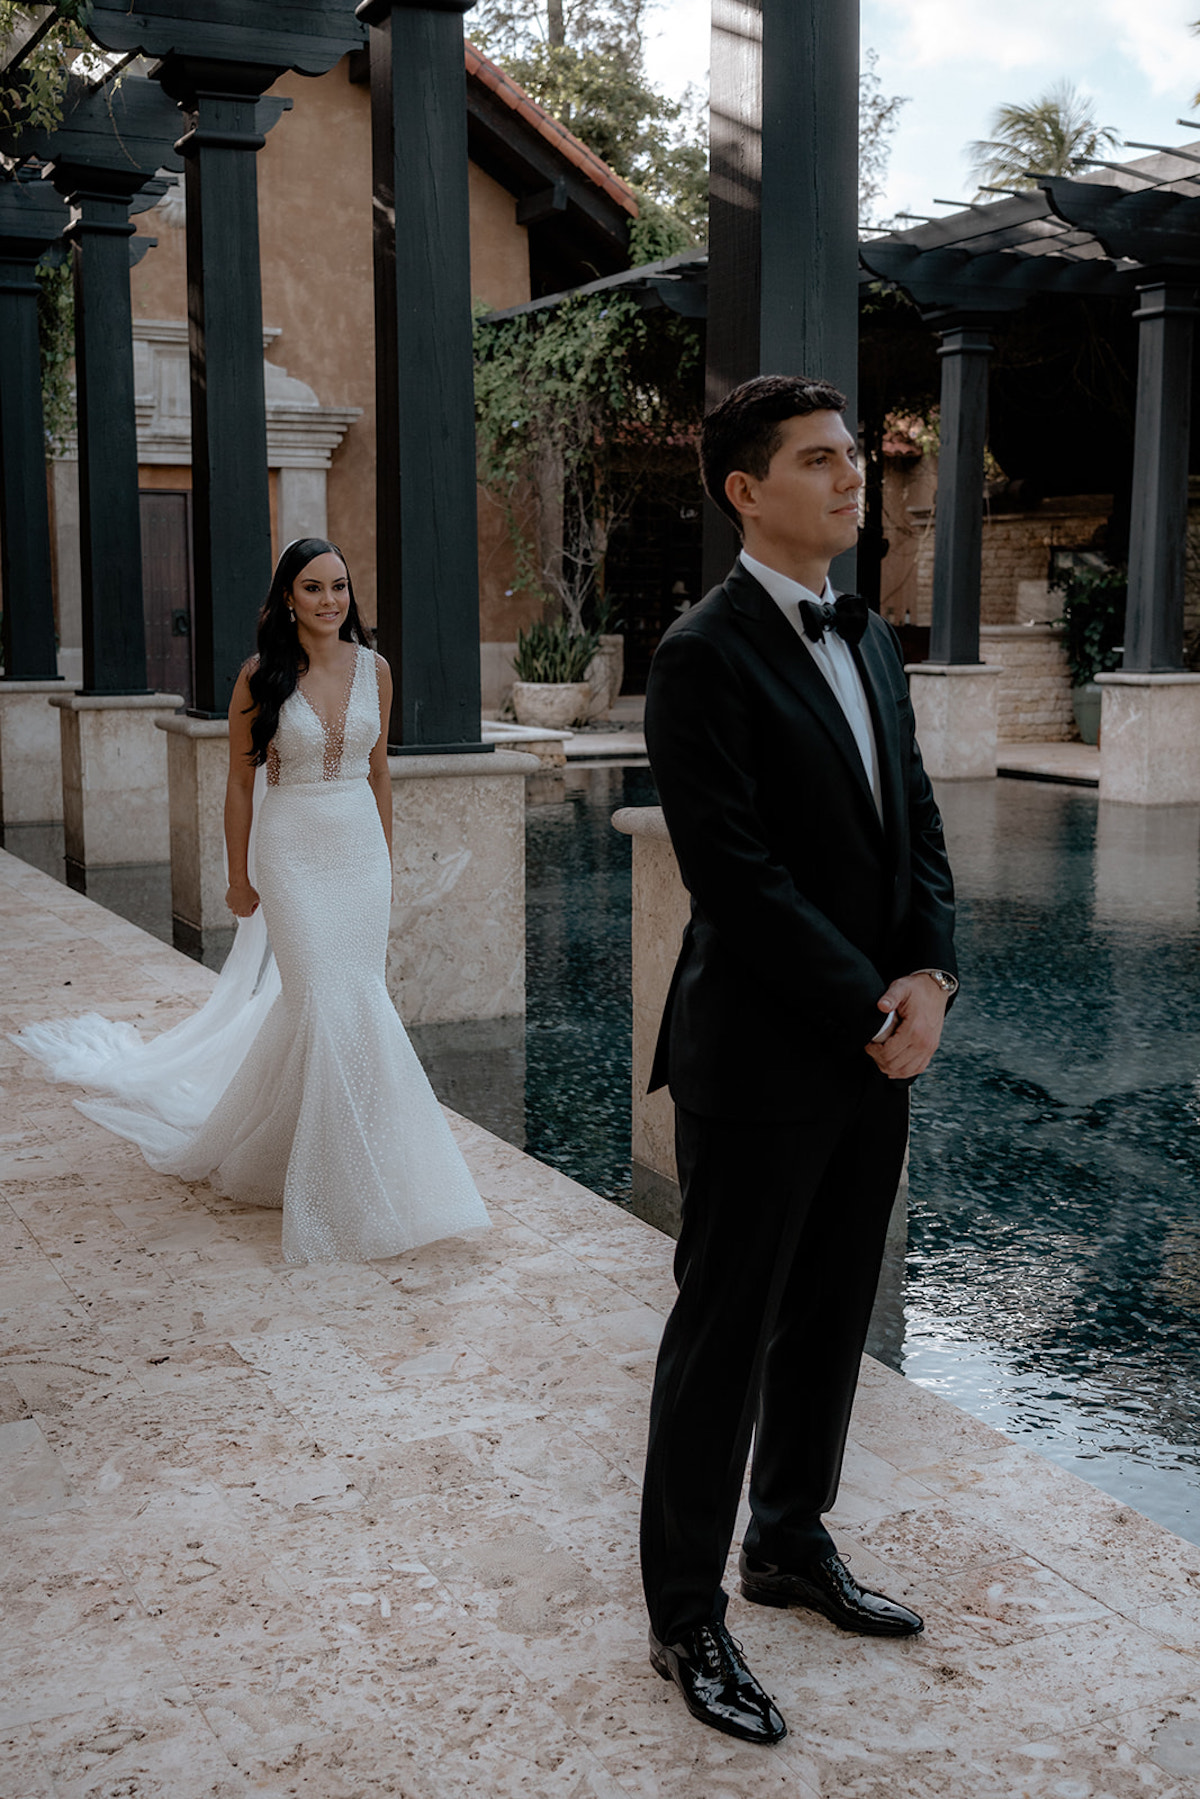 Gatsby Could Never: Contemporary Meets Ethereal for this Glam Ritz Carlton Wedding